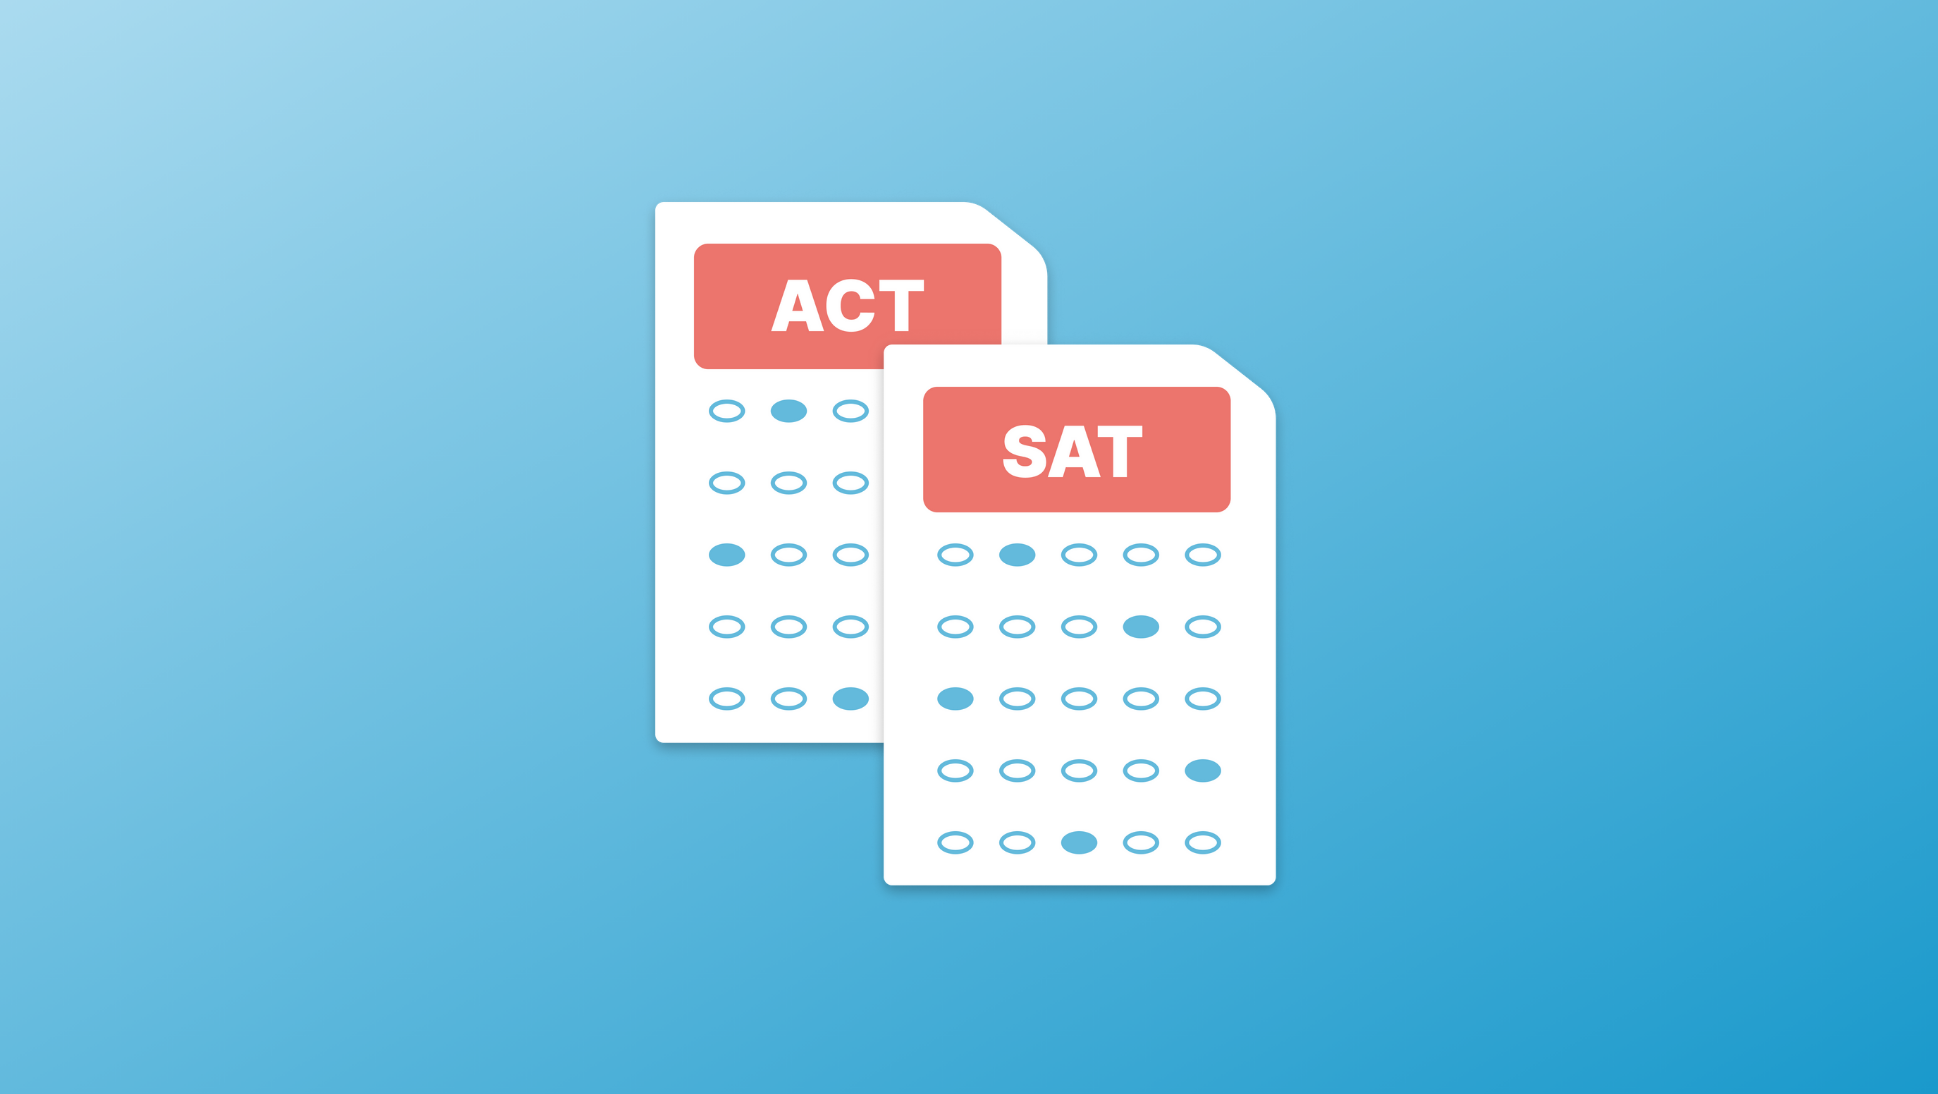 ACT or SAT? Everything You Need to Know to Choose the Best Test for You - illustration of ACT and SAT tests